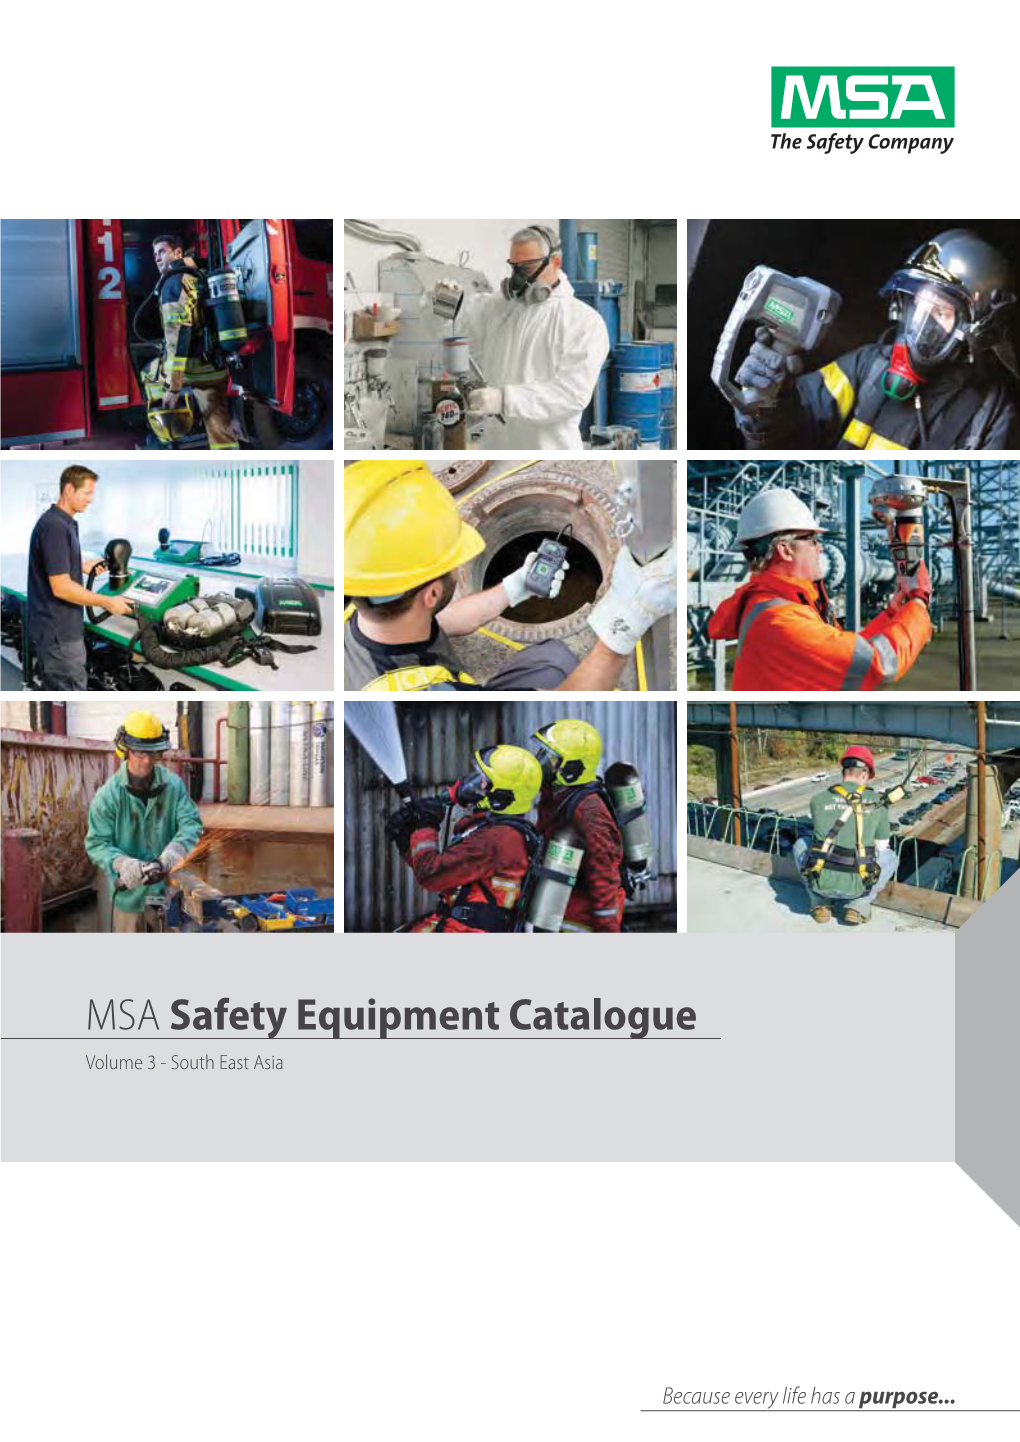 MSA Safety Equipment Catalogue Volume 3 - South East Asia